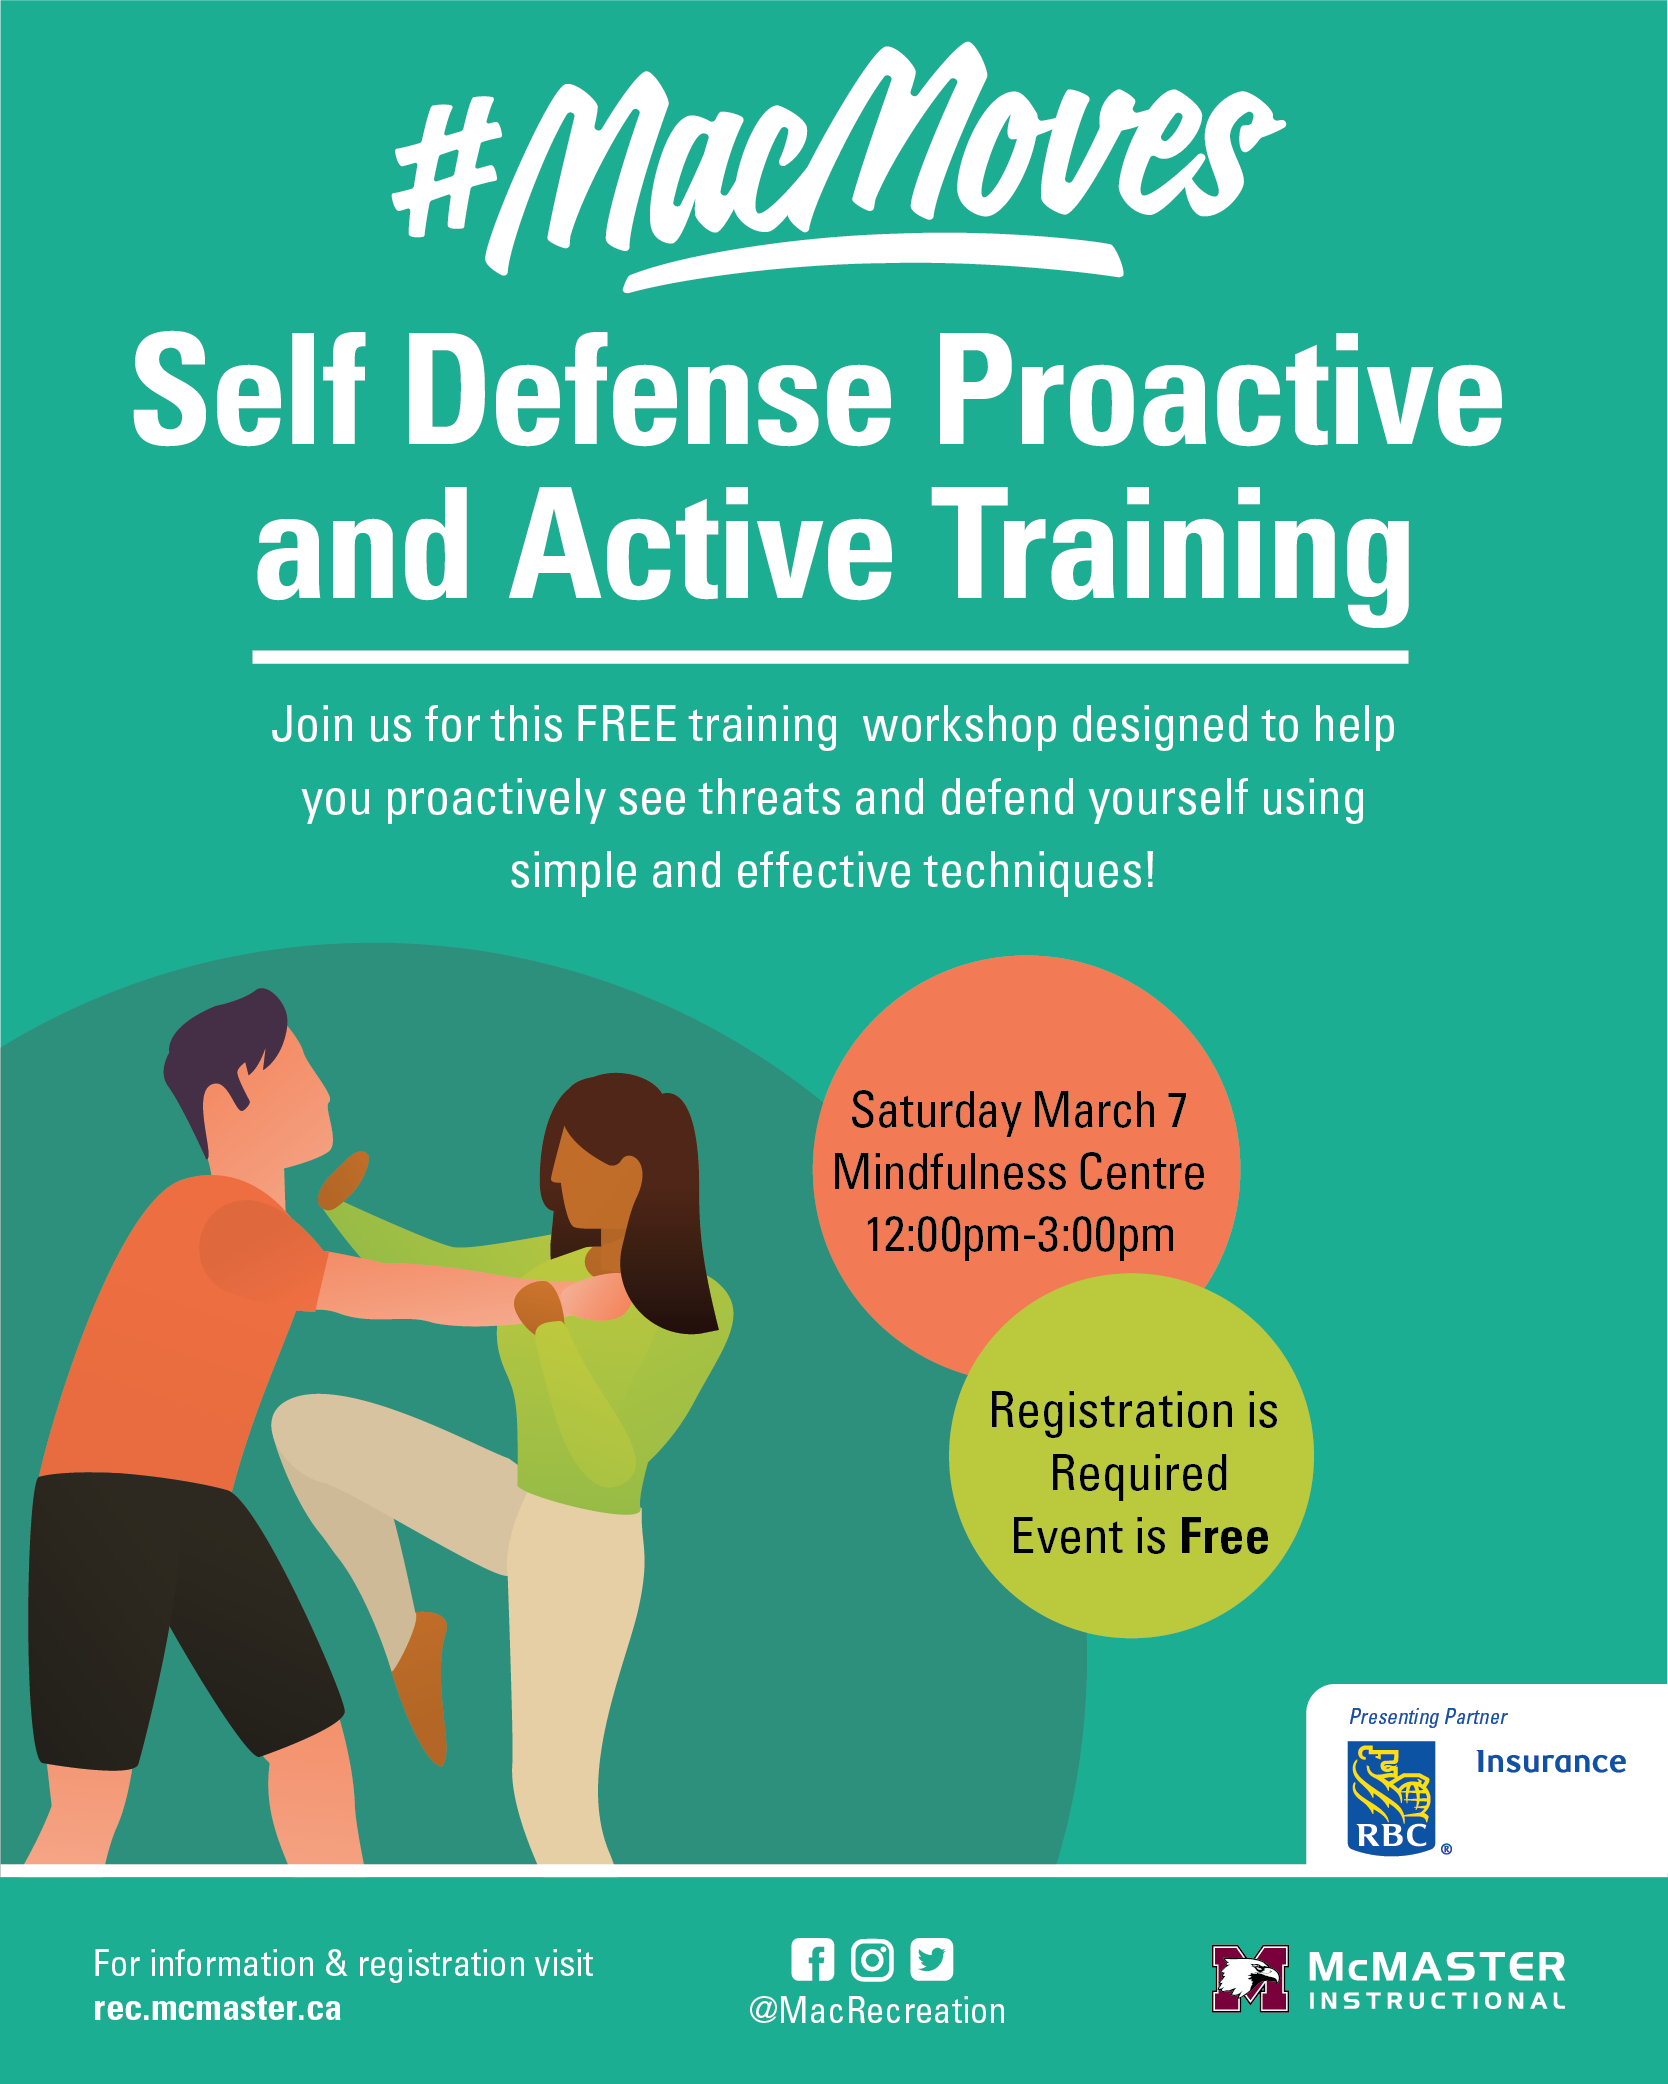 Self Defense, Proactive and Active Training Workshop